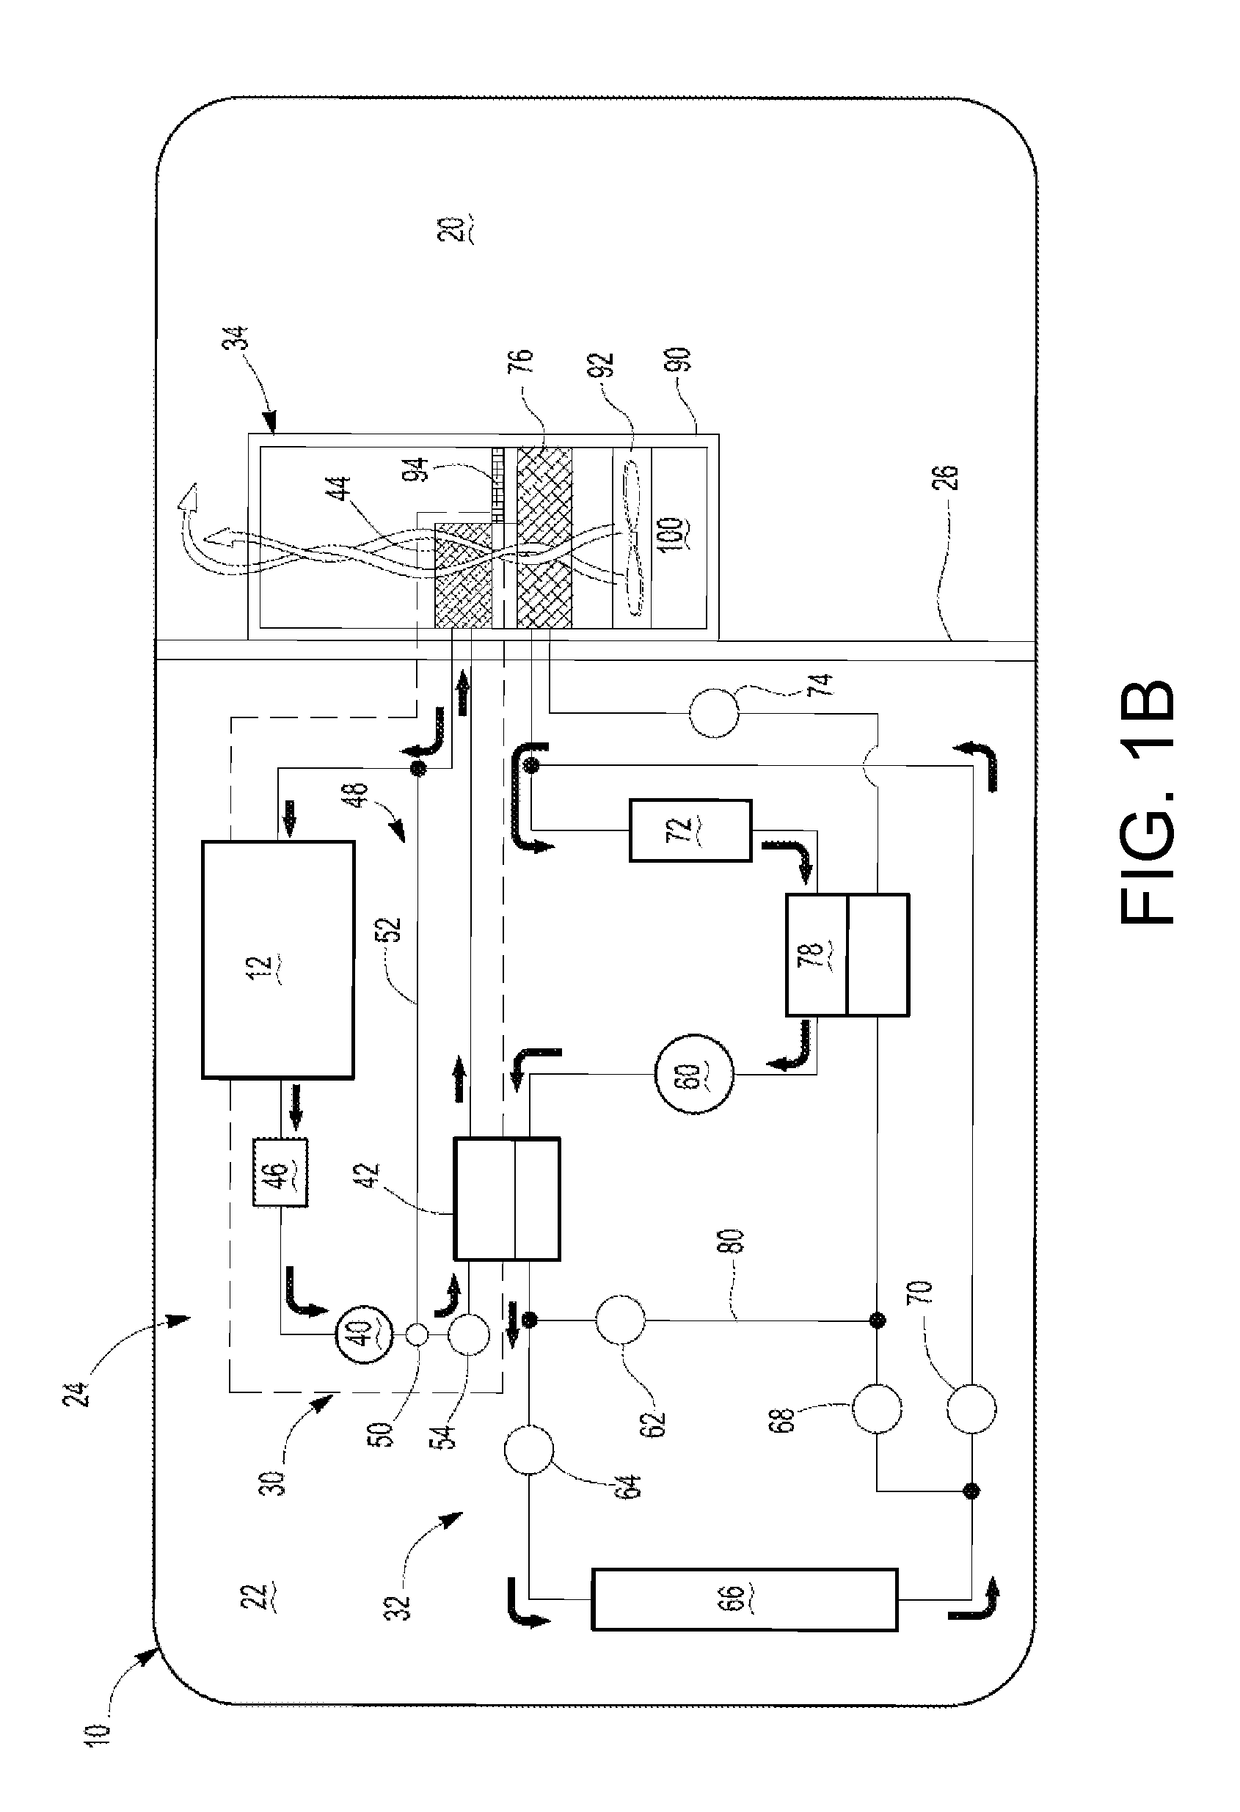 Method and system for heating a vehicle